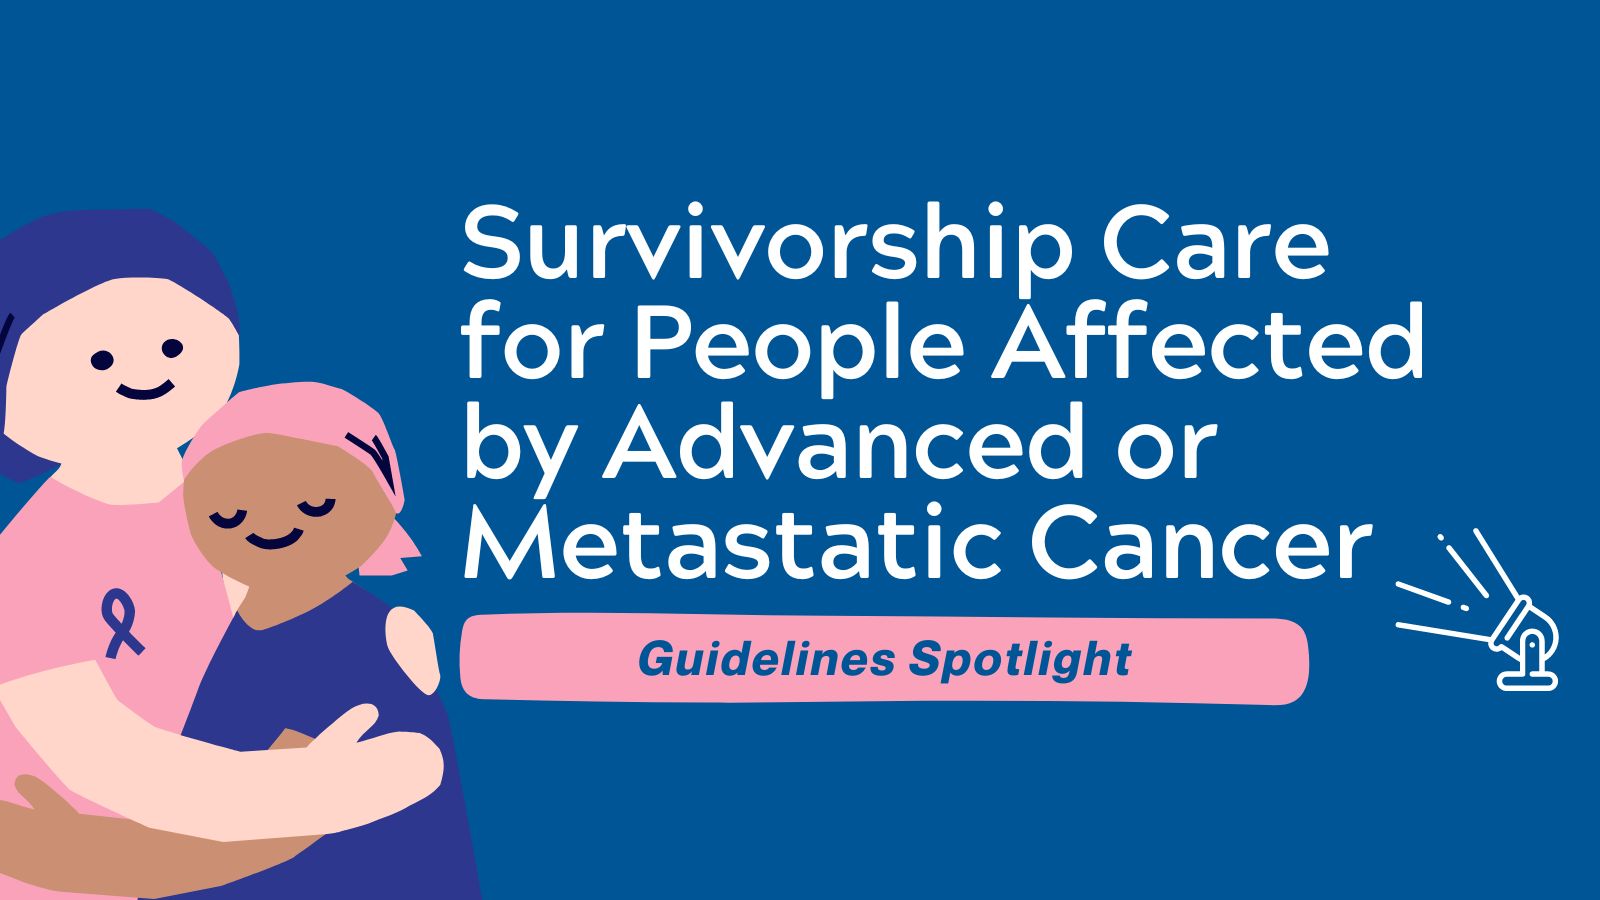 Guidelines Spotlight - Survivorship Care for People Affected by Advanced or Metastatic Cancer